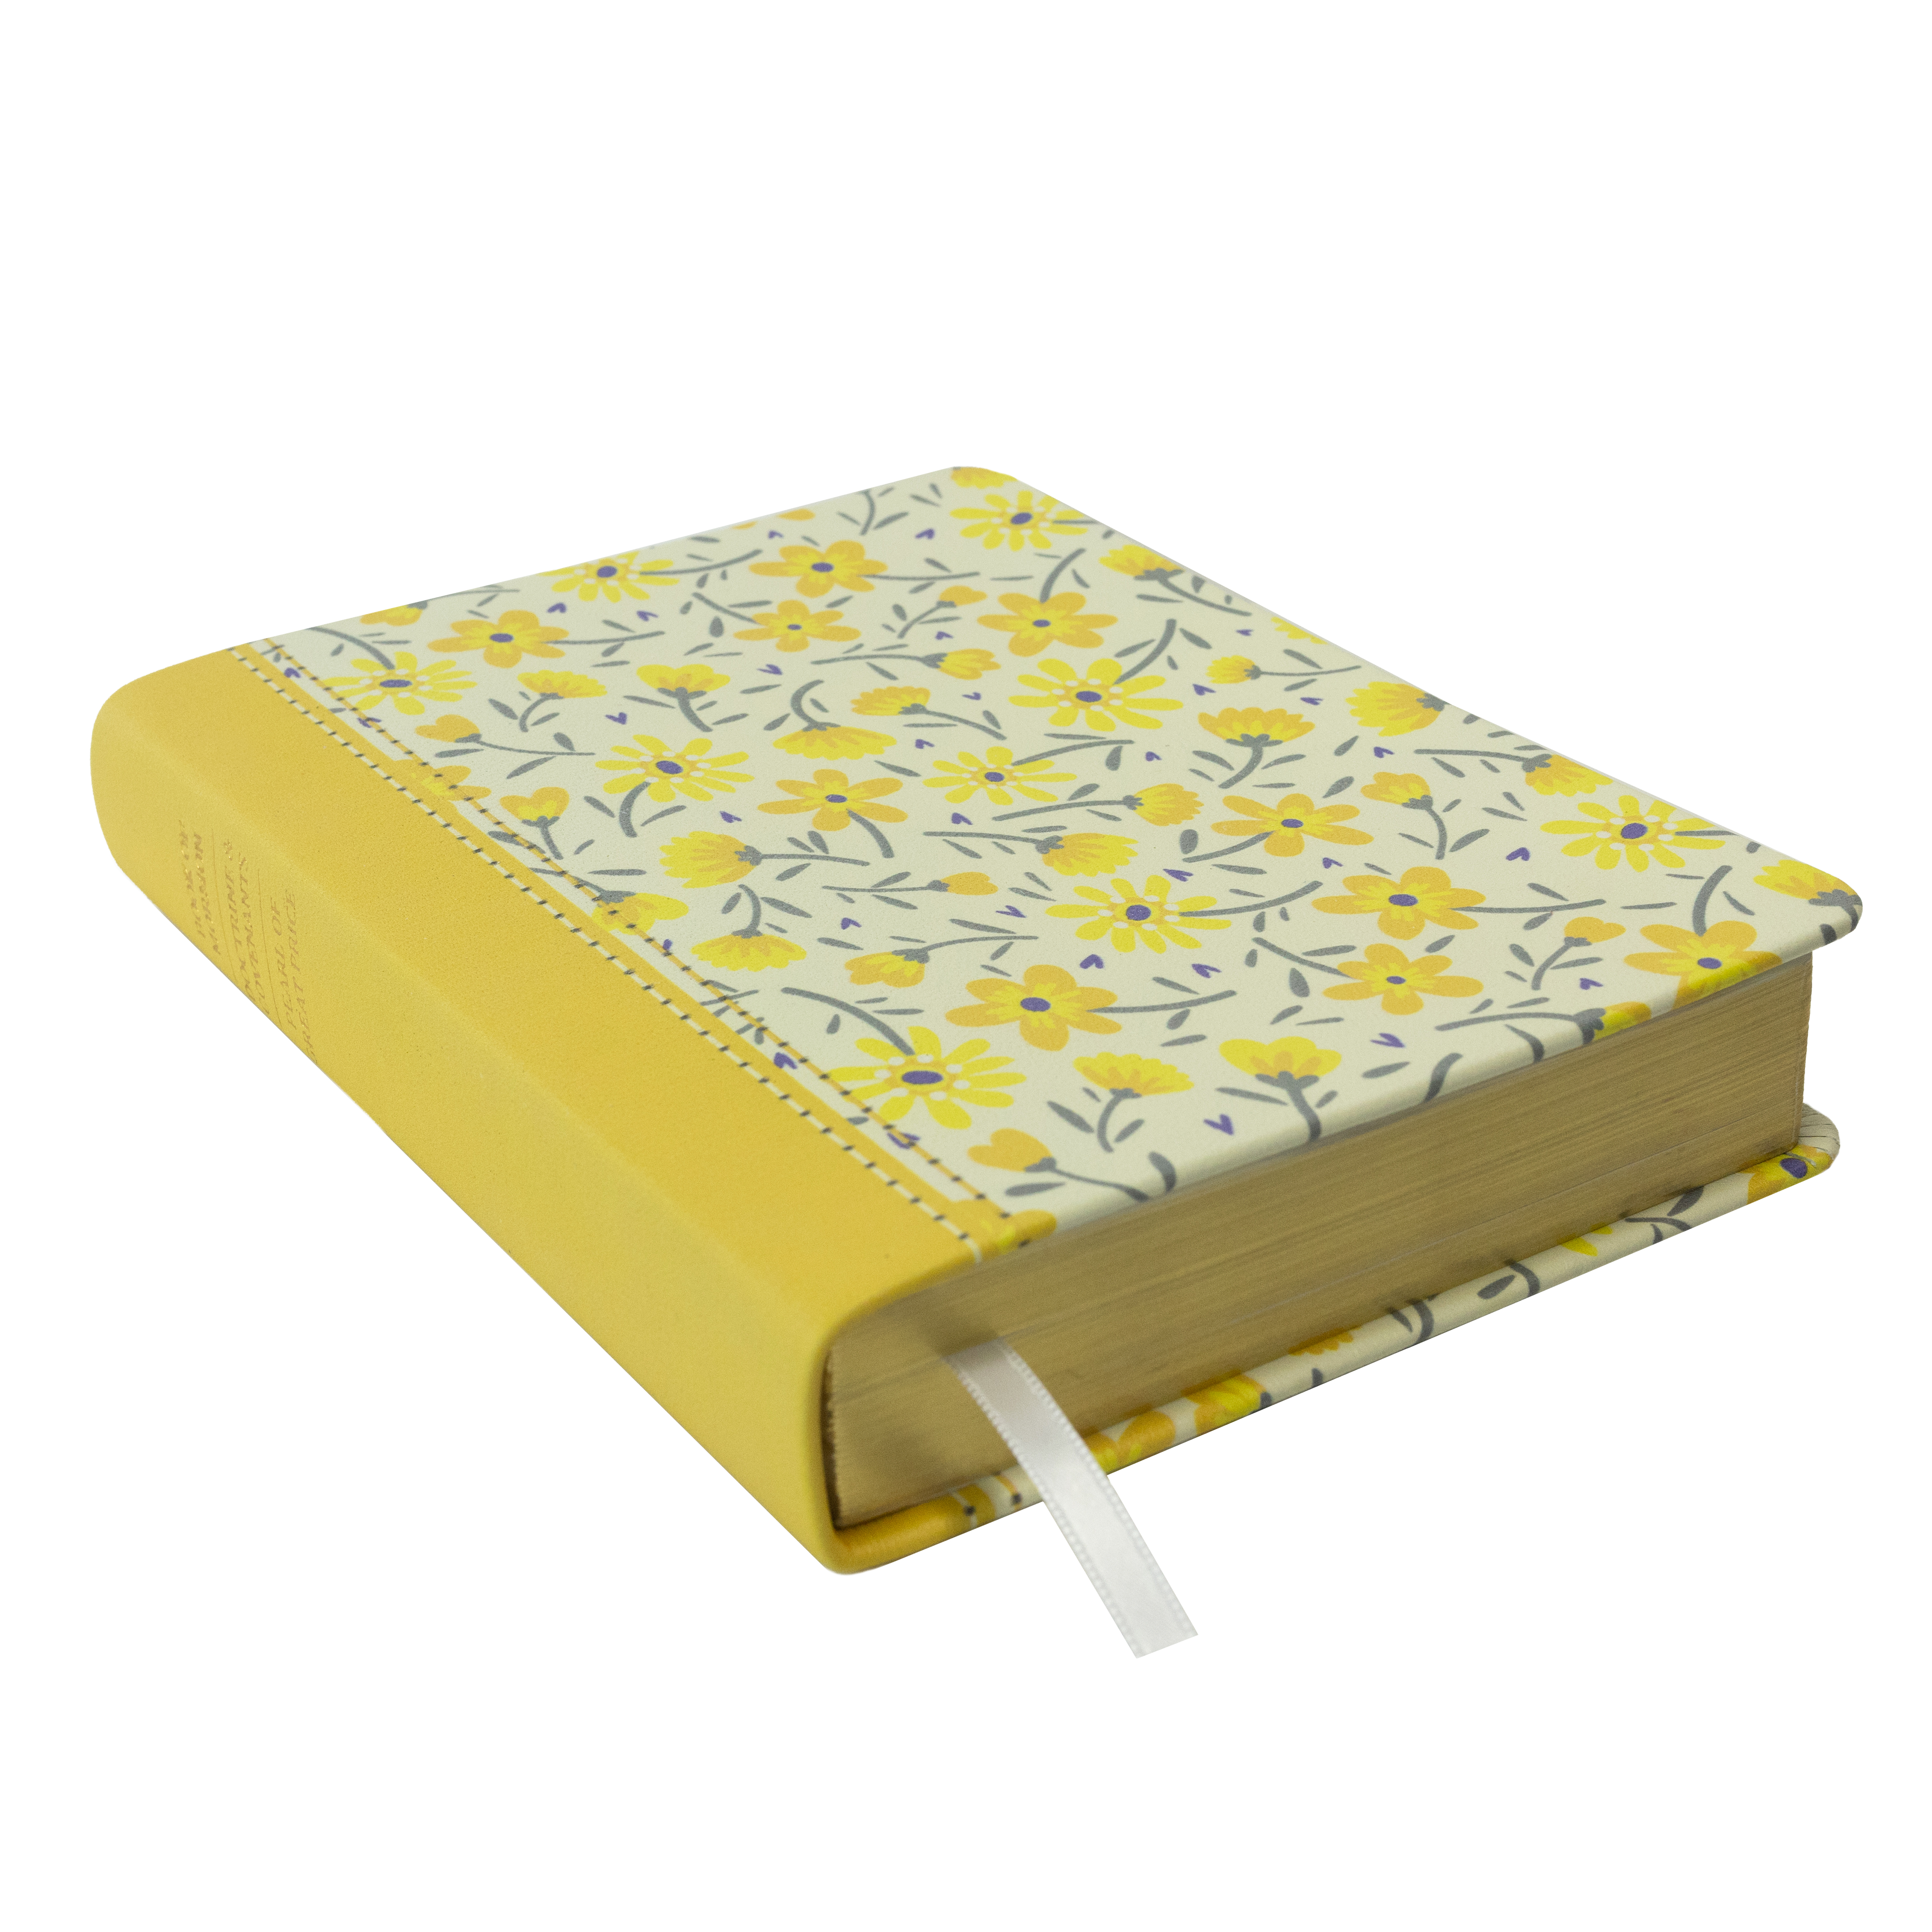 Hand-Bound Genuine Leather Triple - Buttercup Bouquet buttercup scriptures, flower scriptures, flower pattern, yellows flowers, yellow scriptures, yellow pattern, pattern scriptures, patterned scriptures, lds scriptures, scriptures